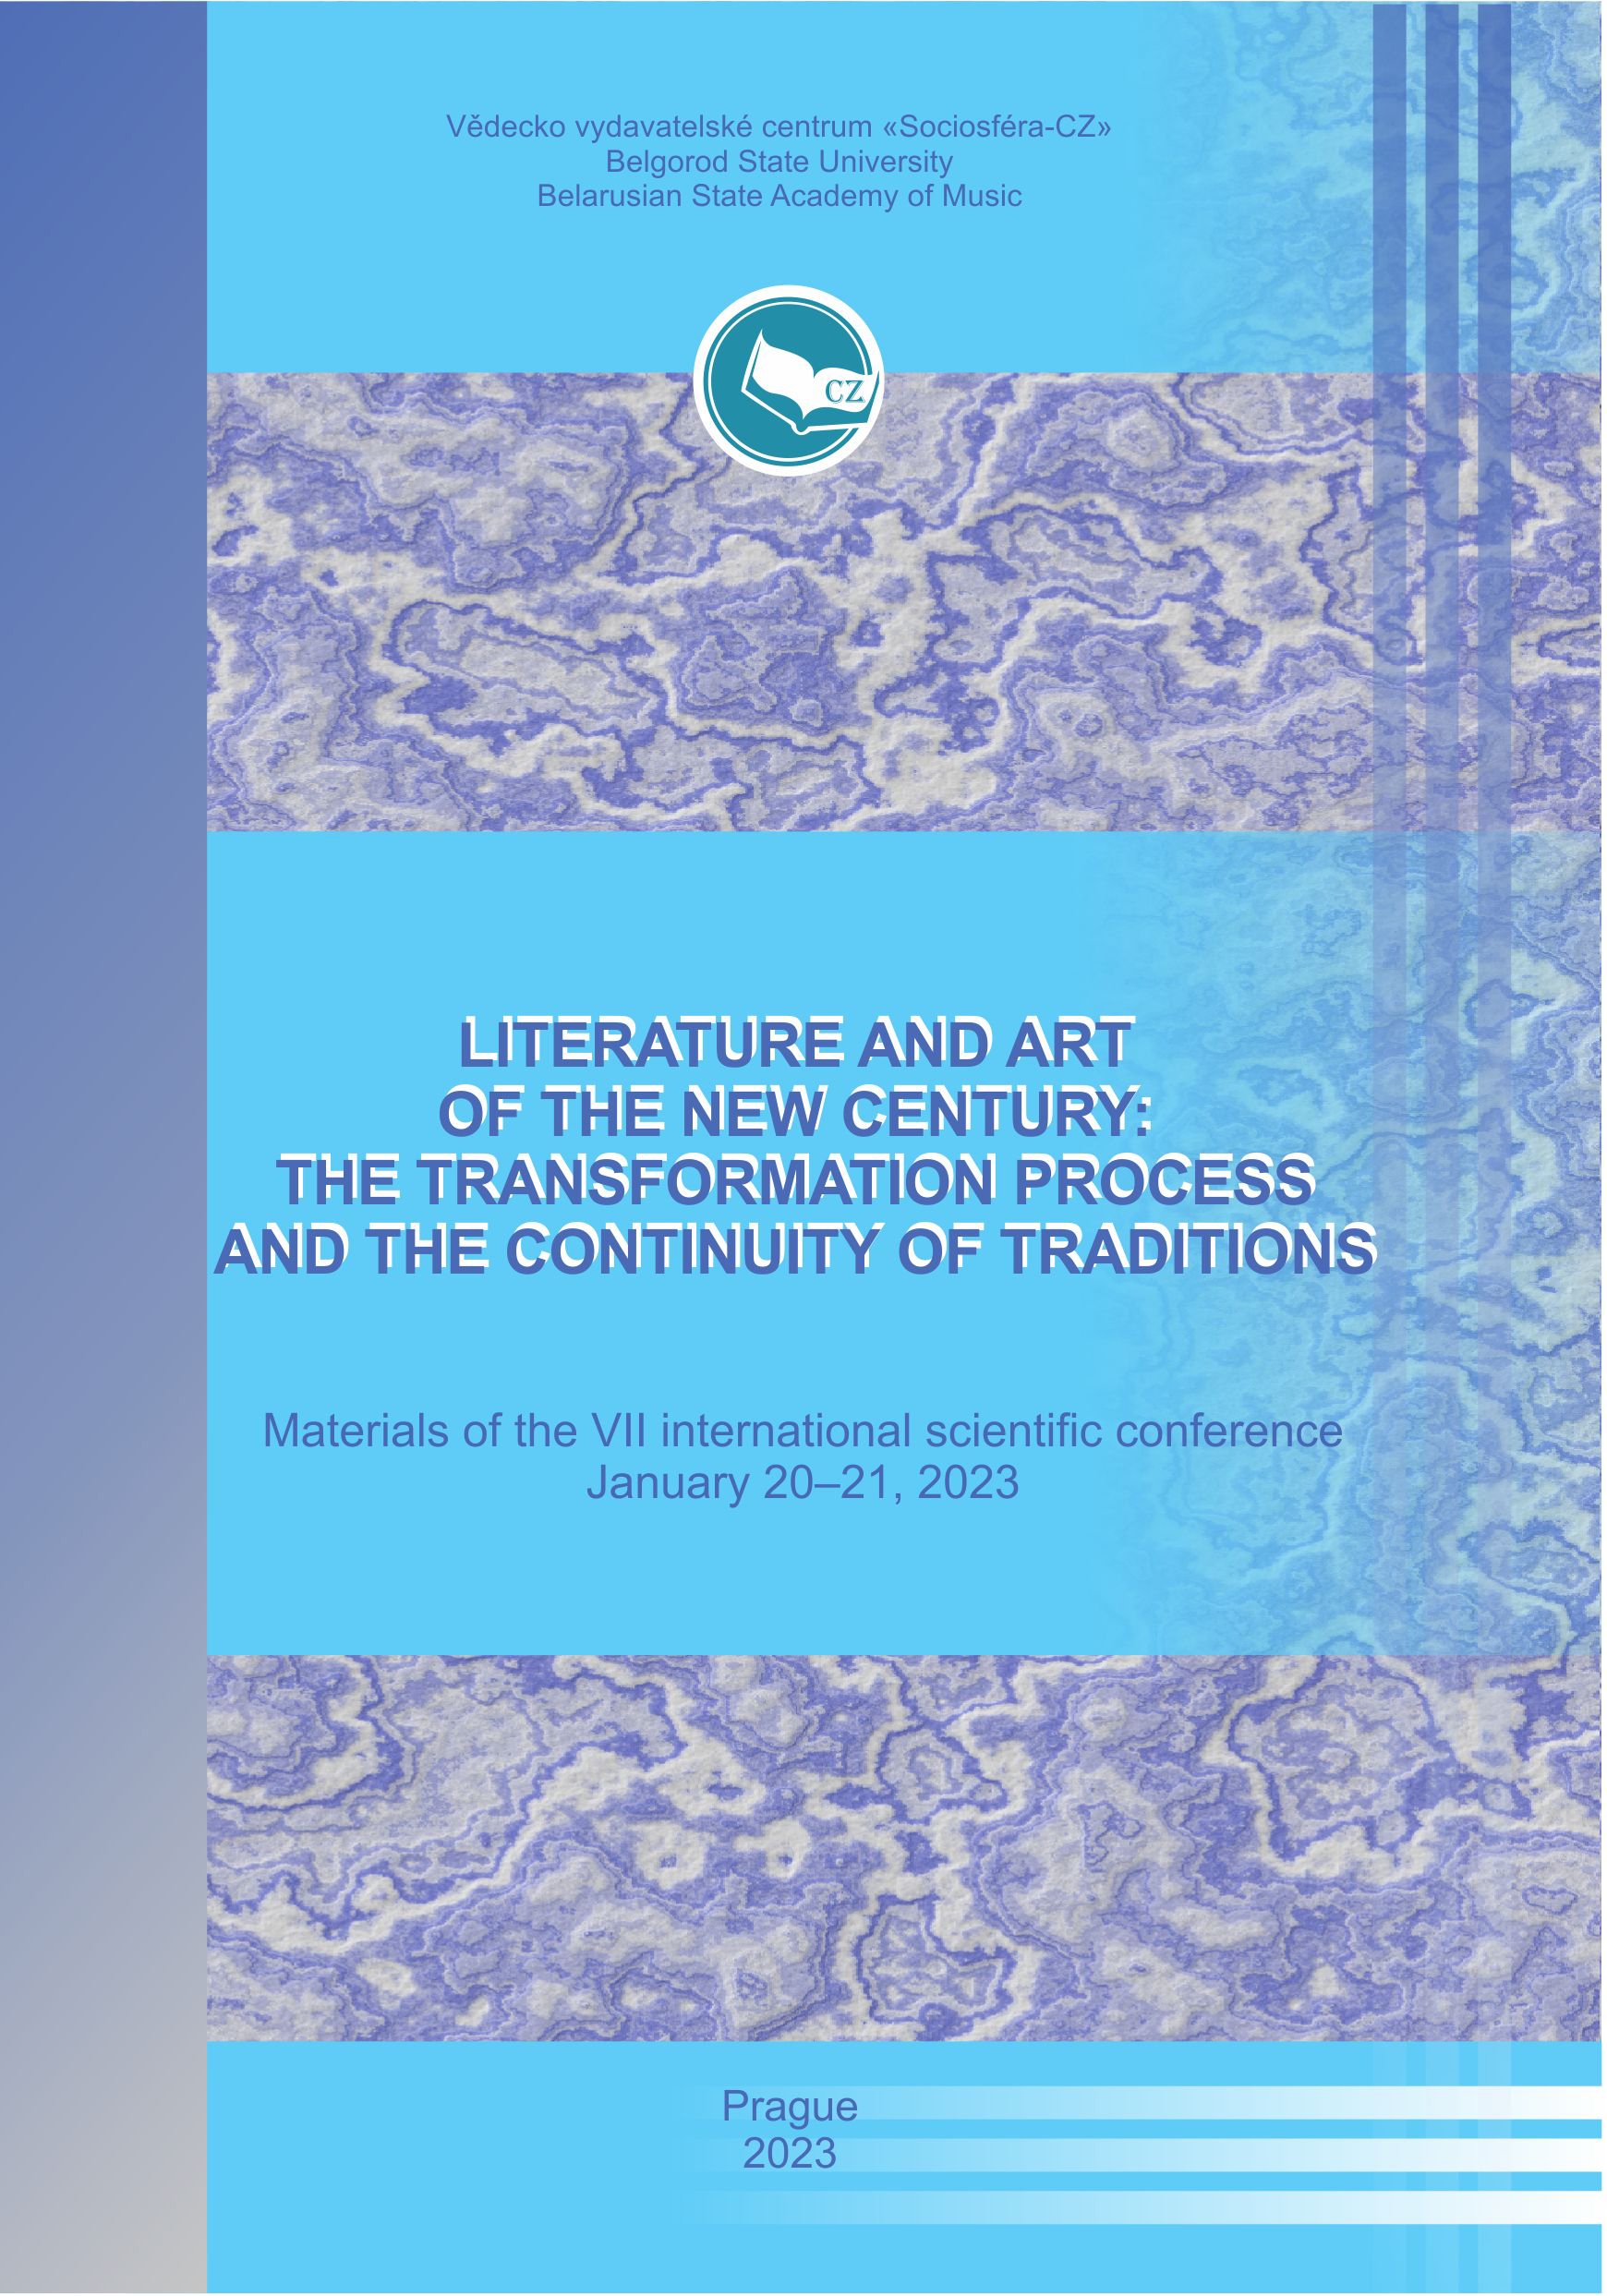 Literature and art of the new century: the transformation process and the continuity of traditions